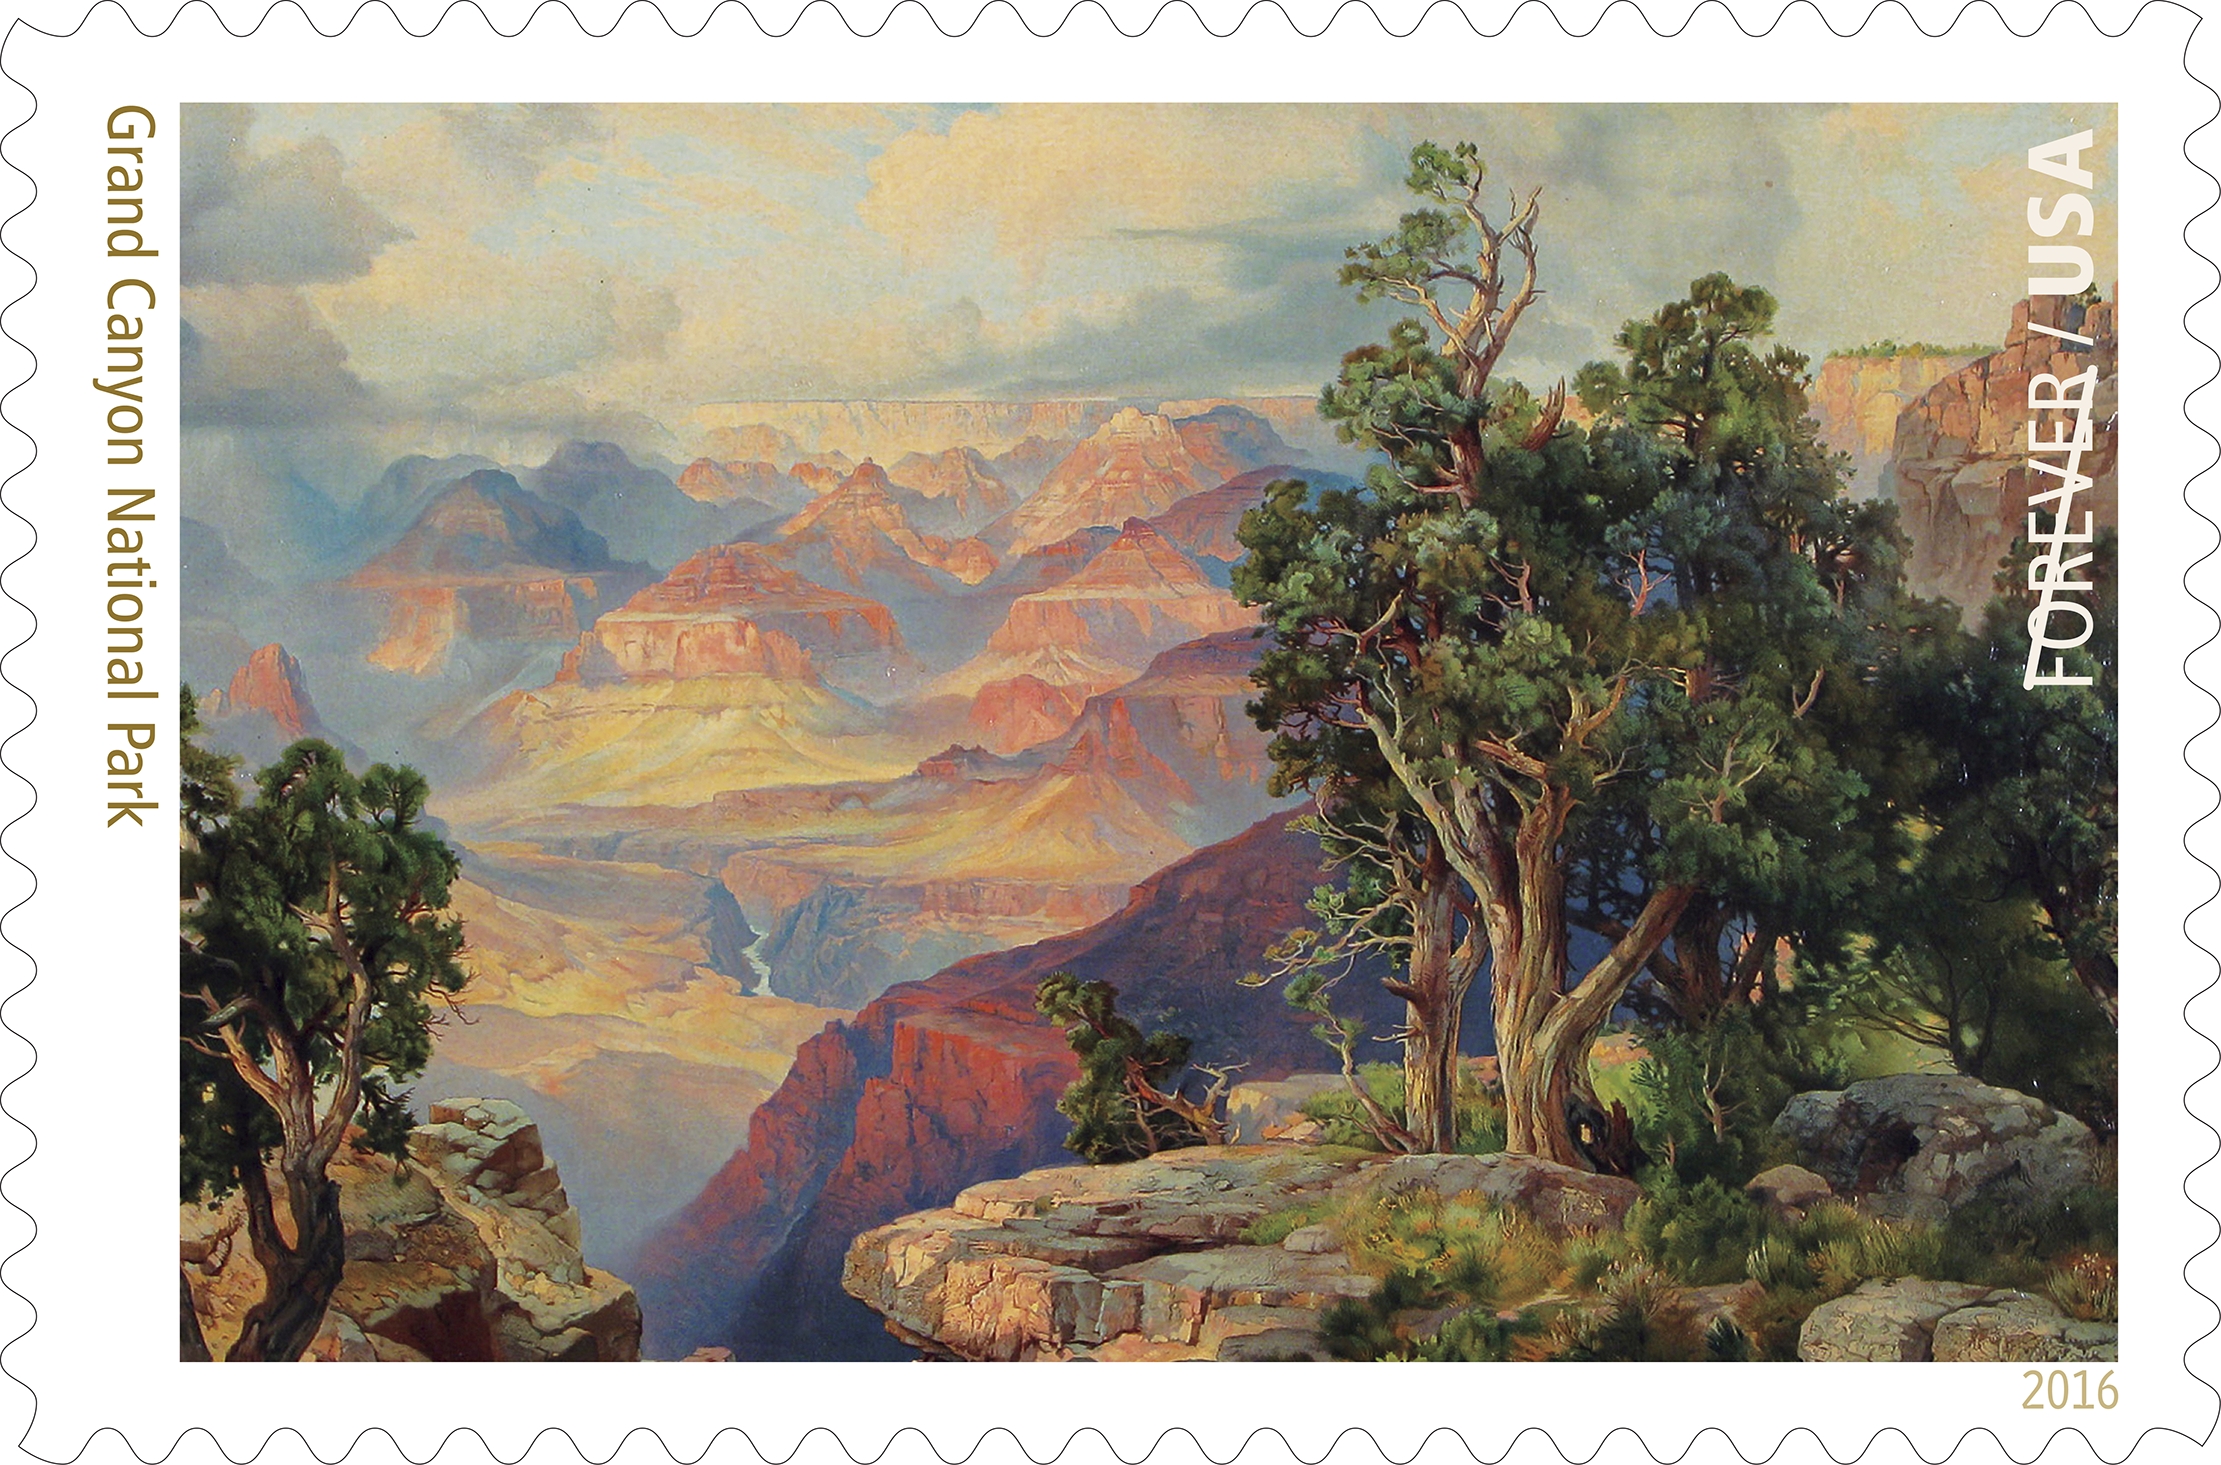 Grand Canyon National Park celebrated in National Parks series